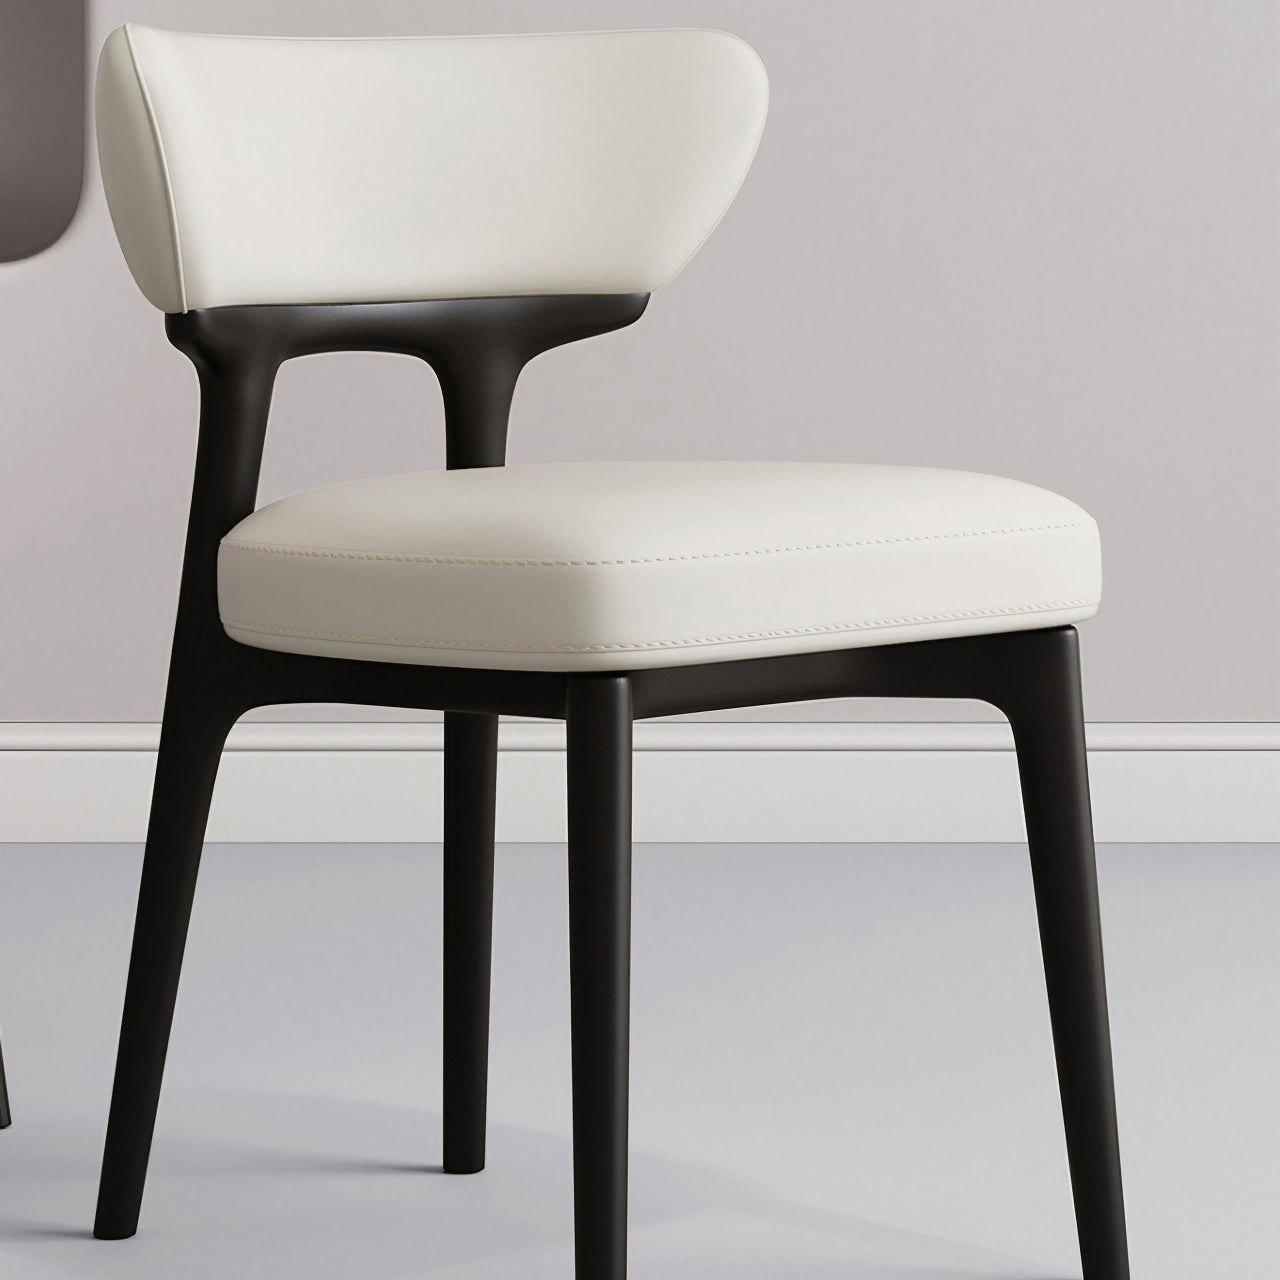 Elegant white modern minimalist dining chair with streamlined back